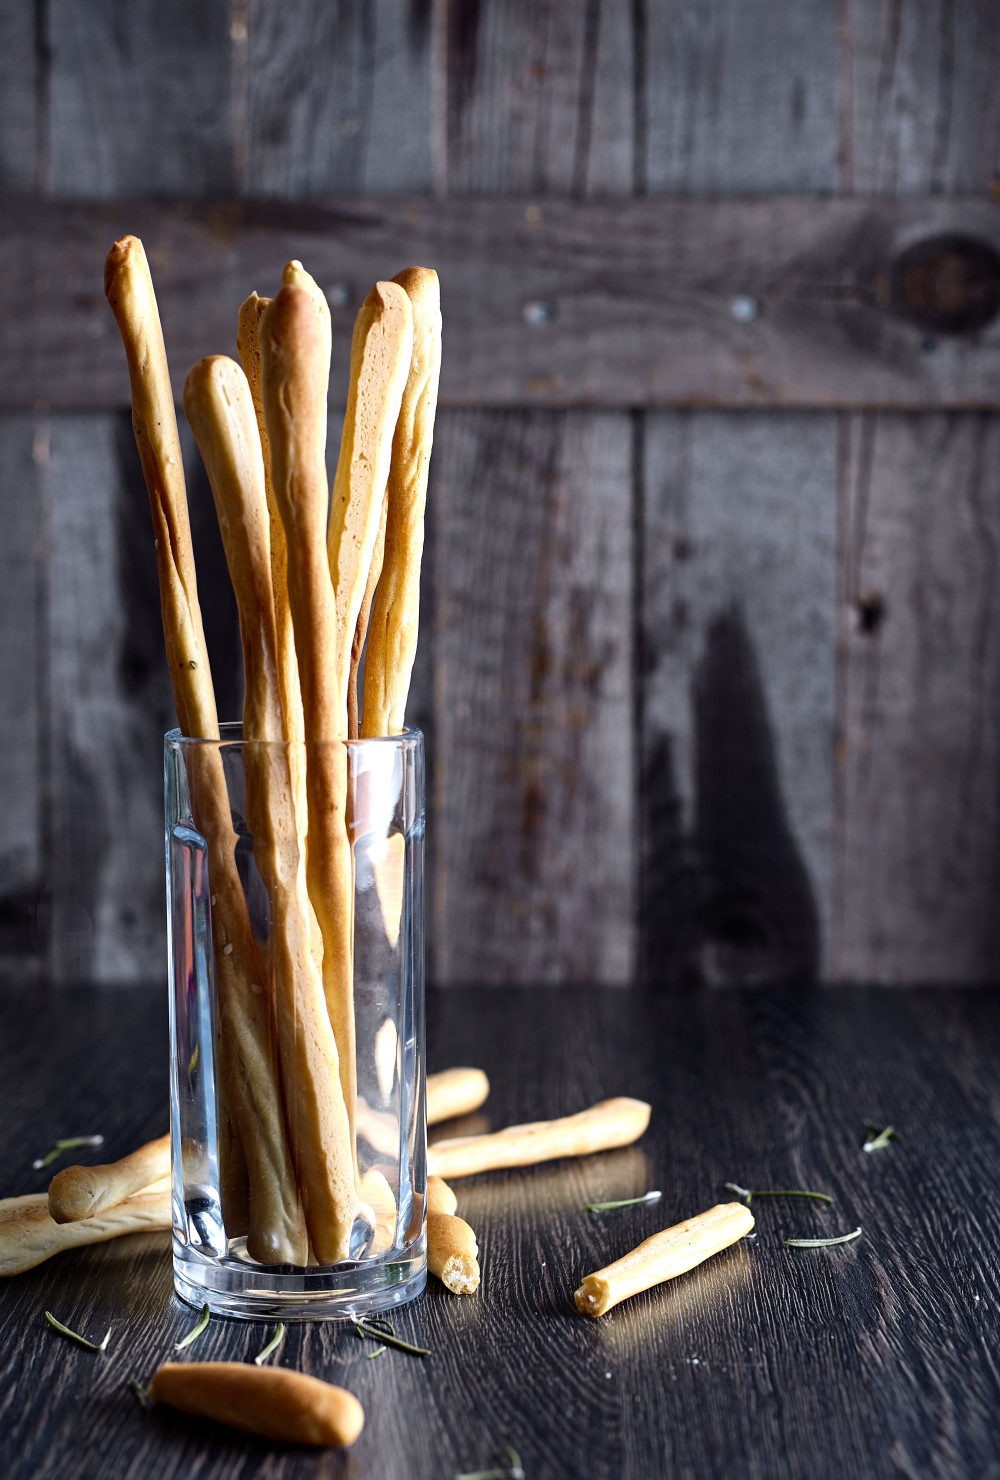 Italian Breadsticks Grissini easy to make step-by-step recipe